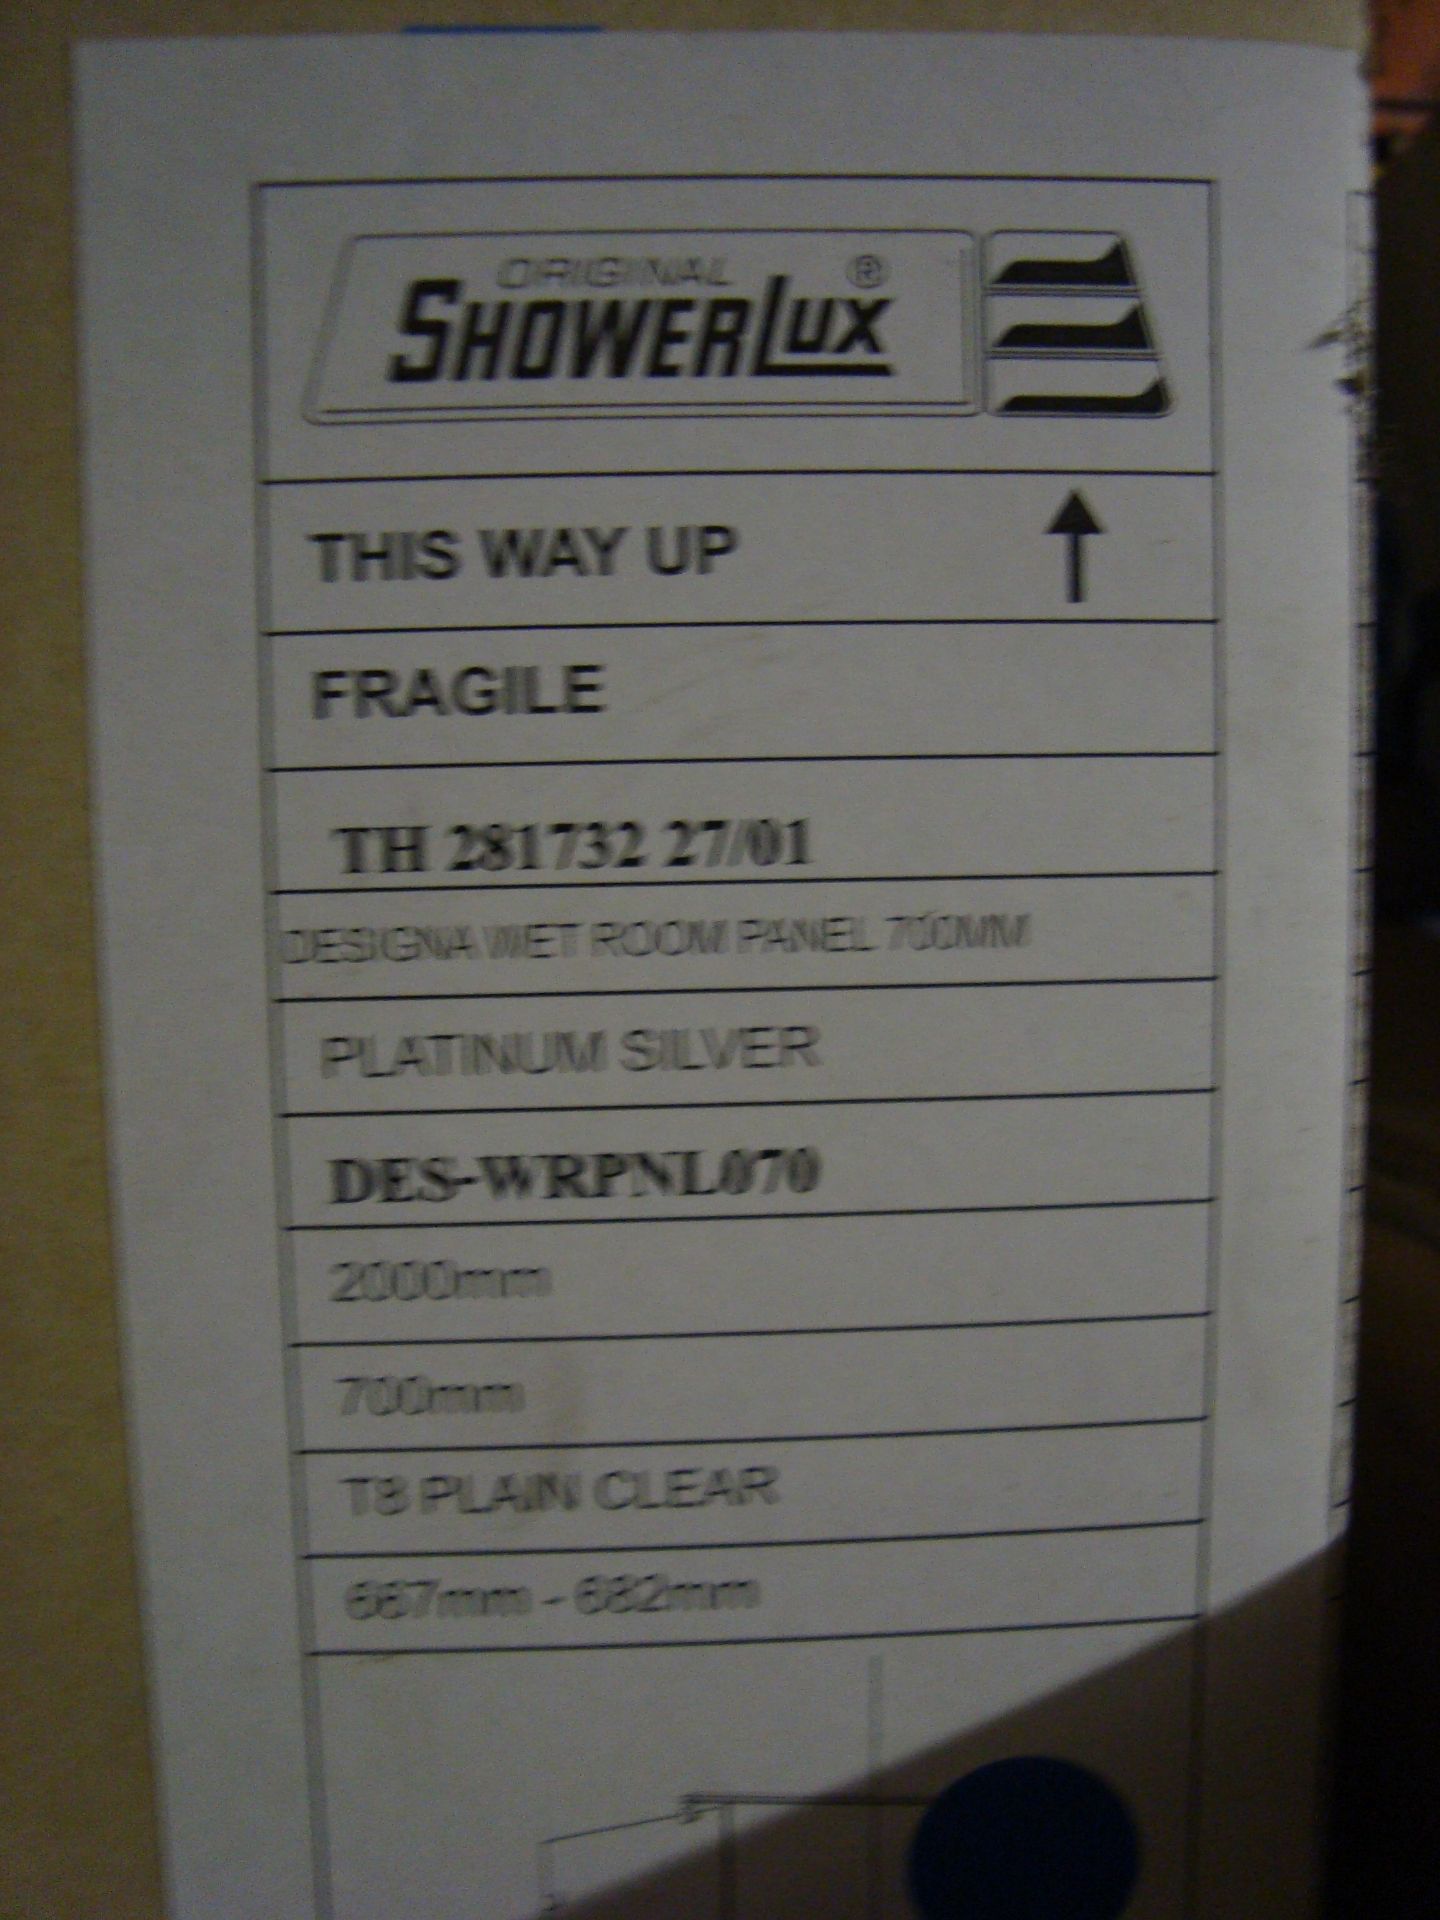 Showerlux "Design" 700Mm Shower Panel Boxed And New - Image 2 of 2